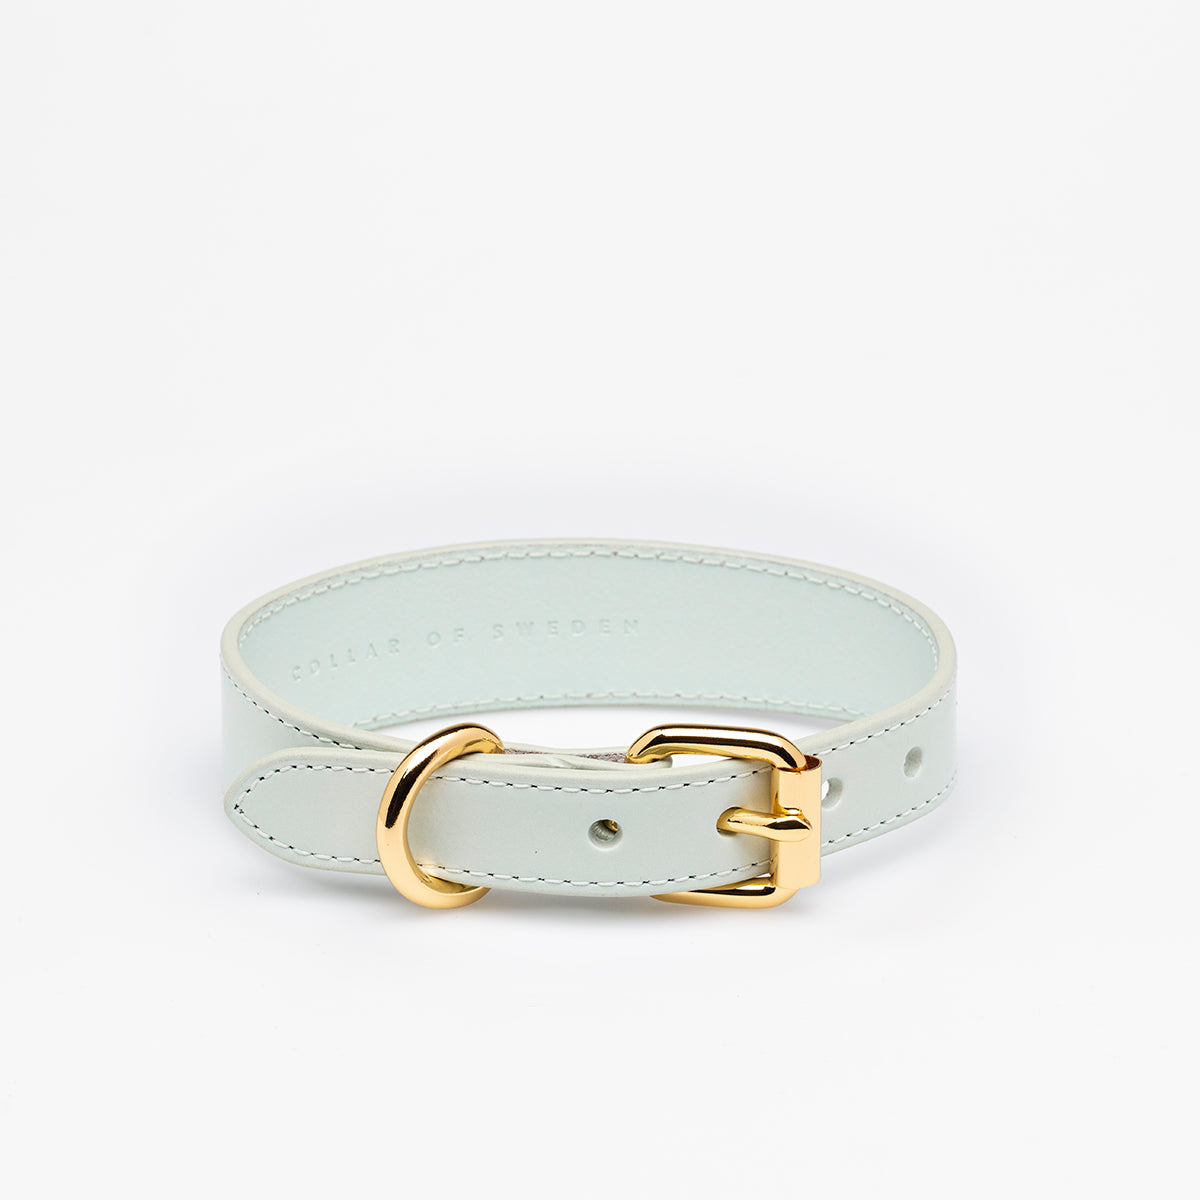 image - Mint Leather Collar Large Thin